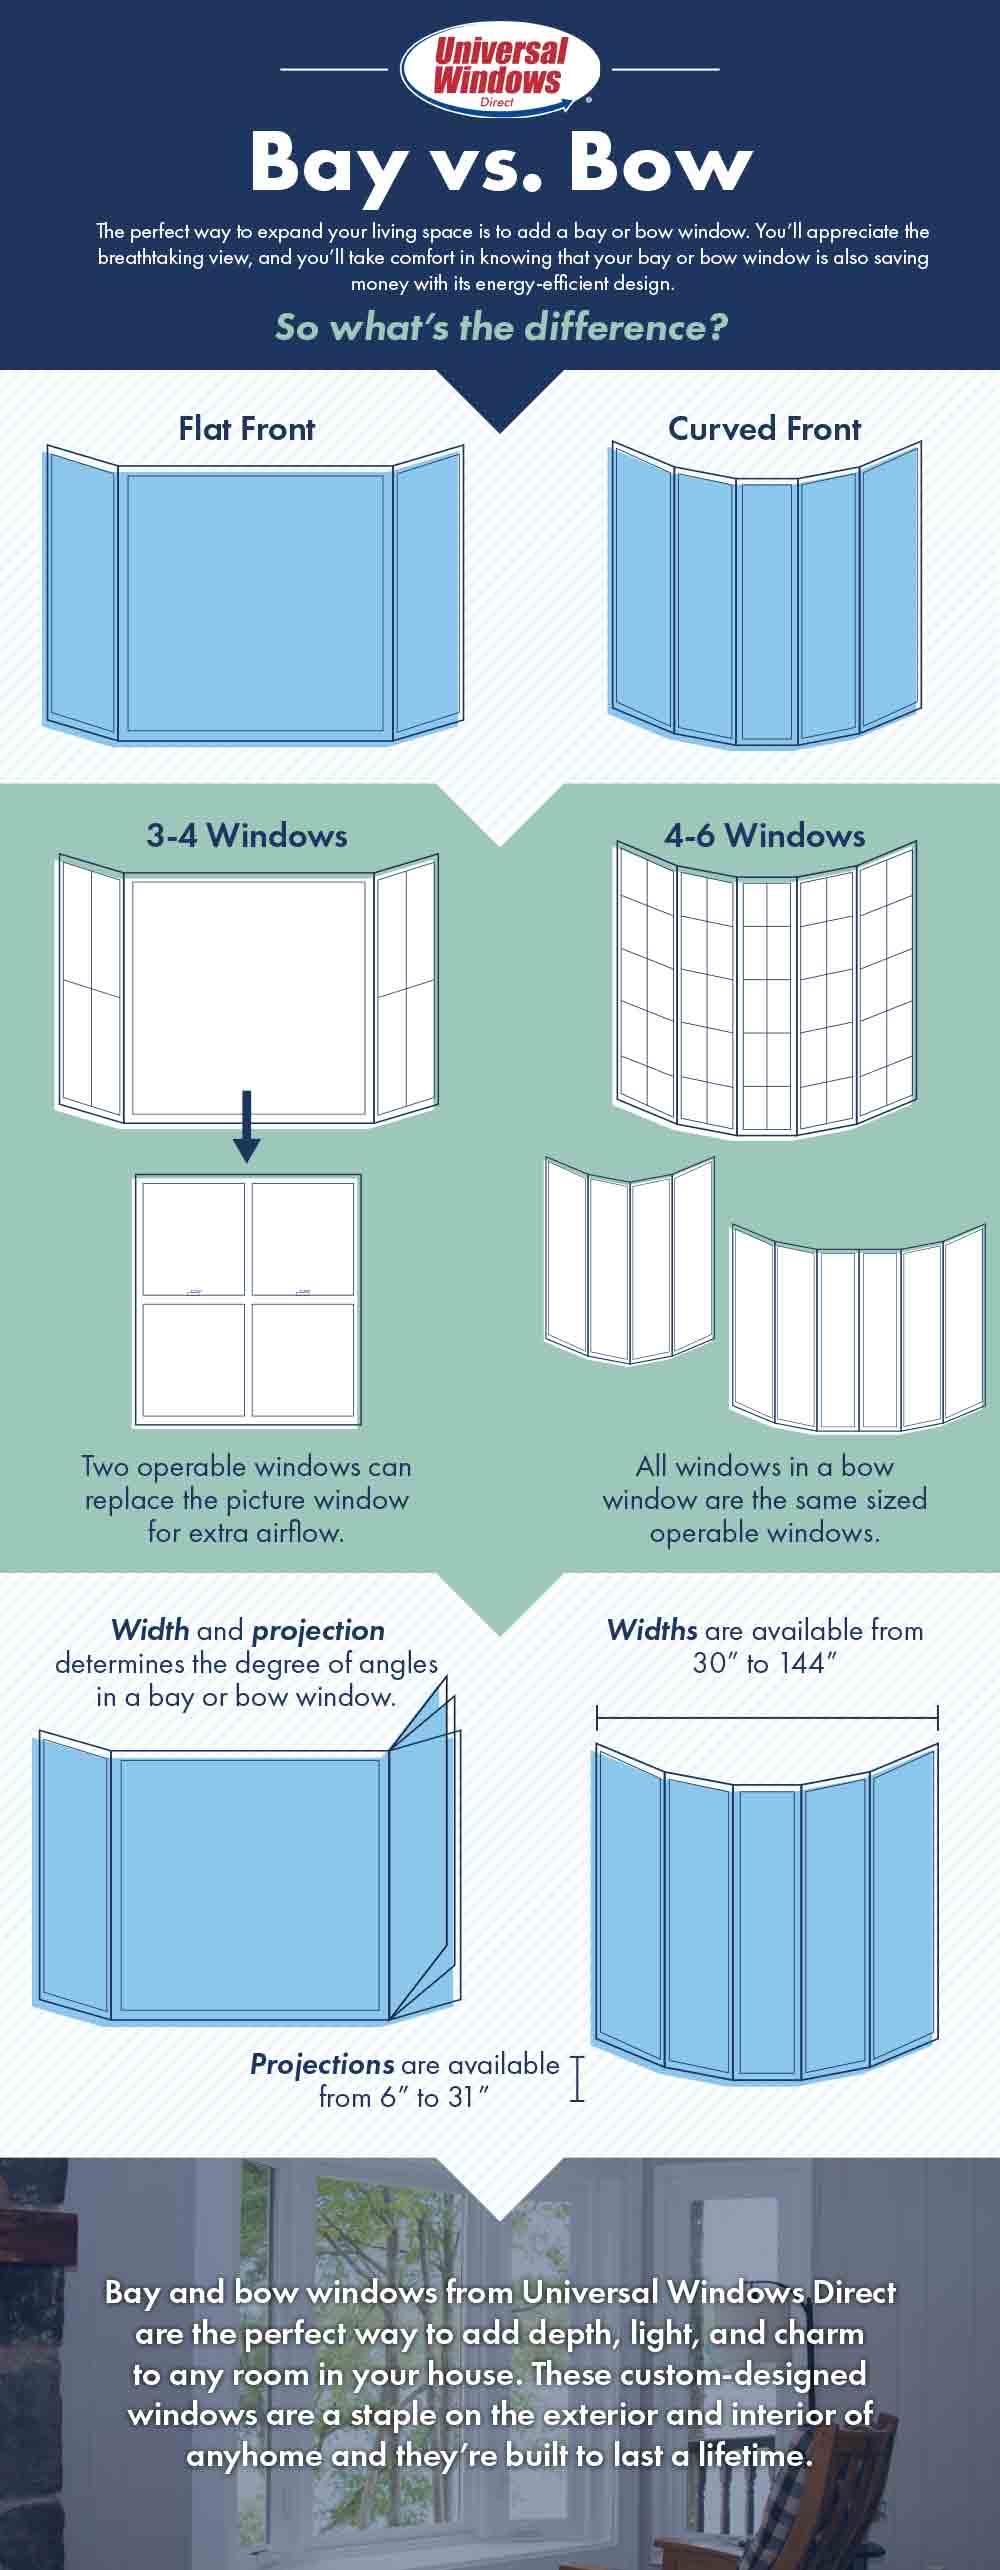 Infographic showing the difference between a bay and a bow window